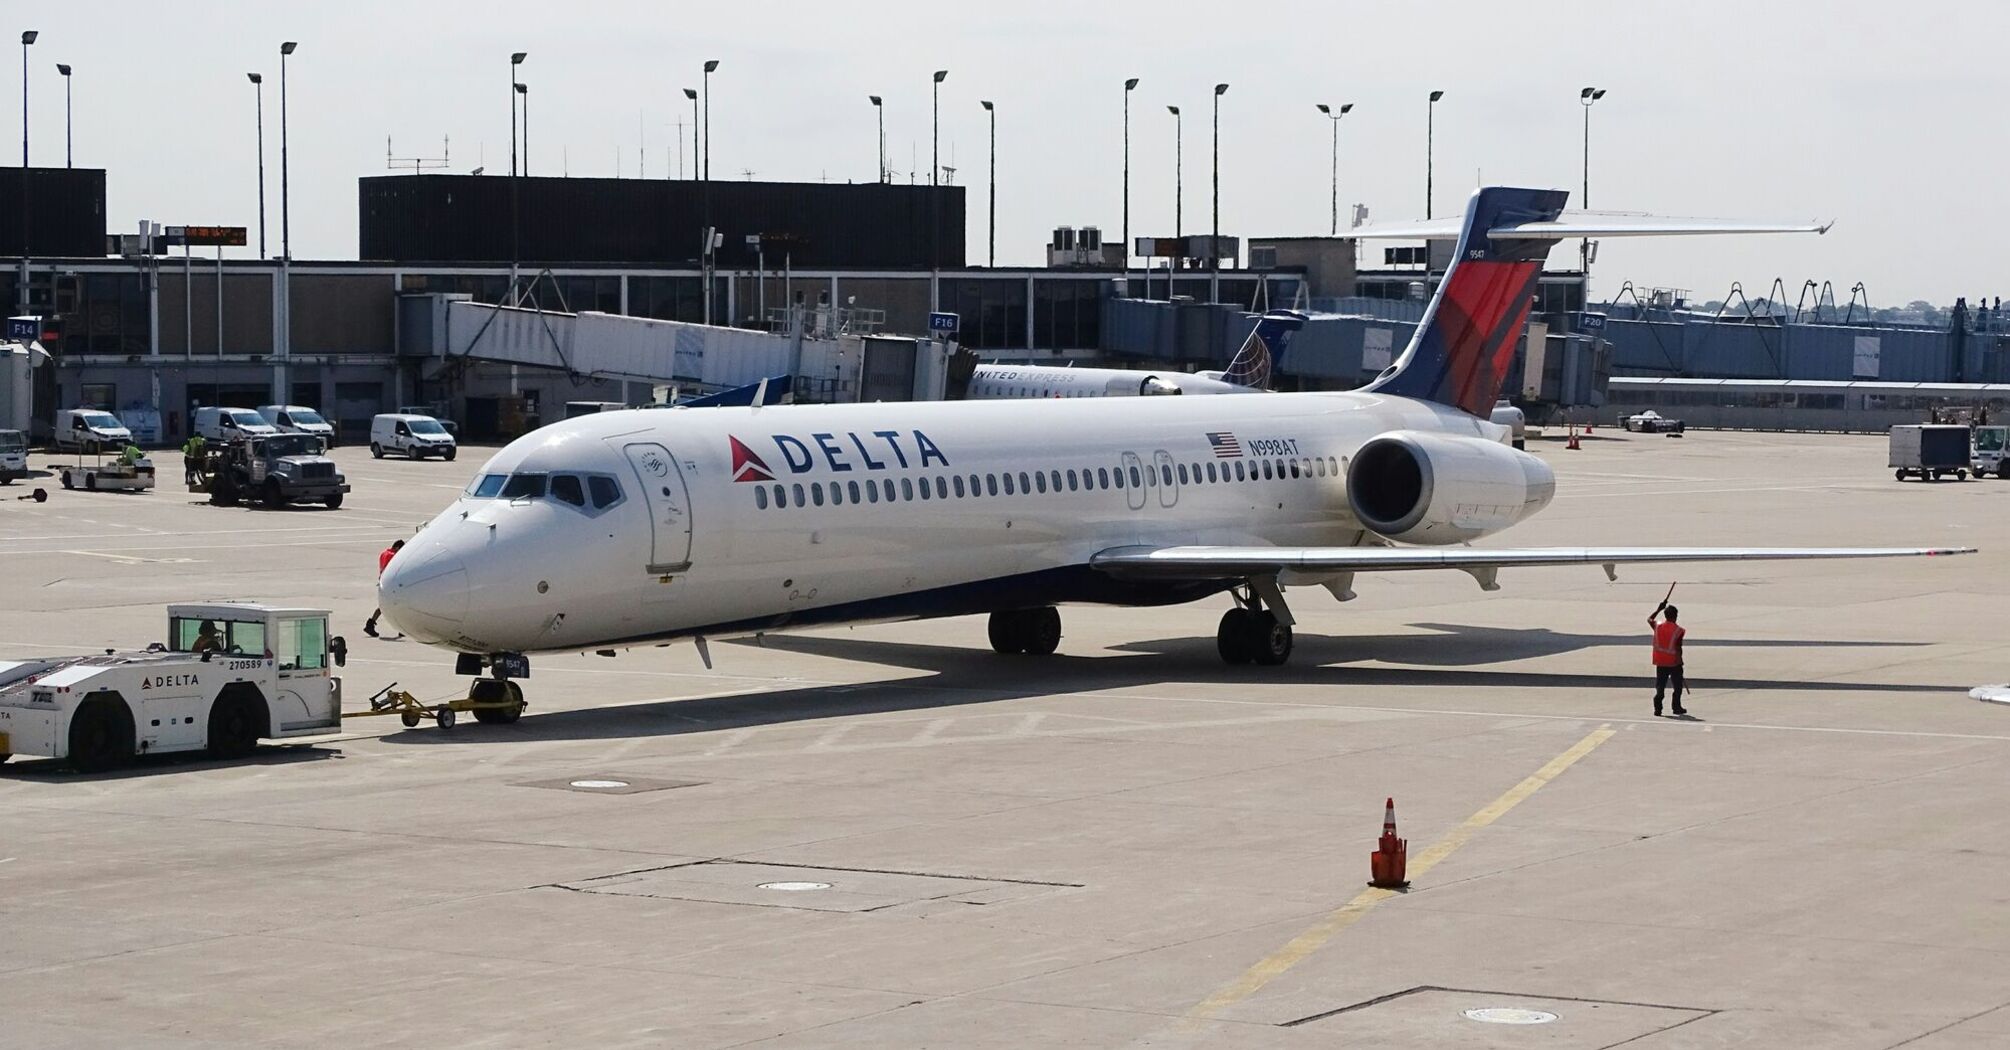 A Delta Airlines aircraft on the tarmac with airport facilities in the background